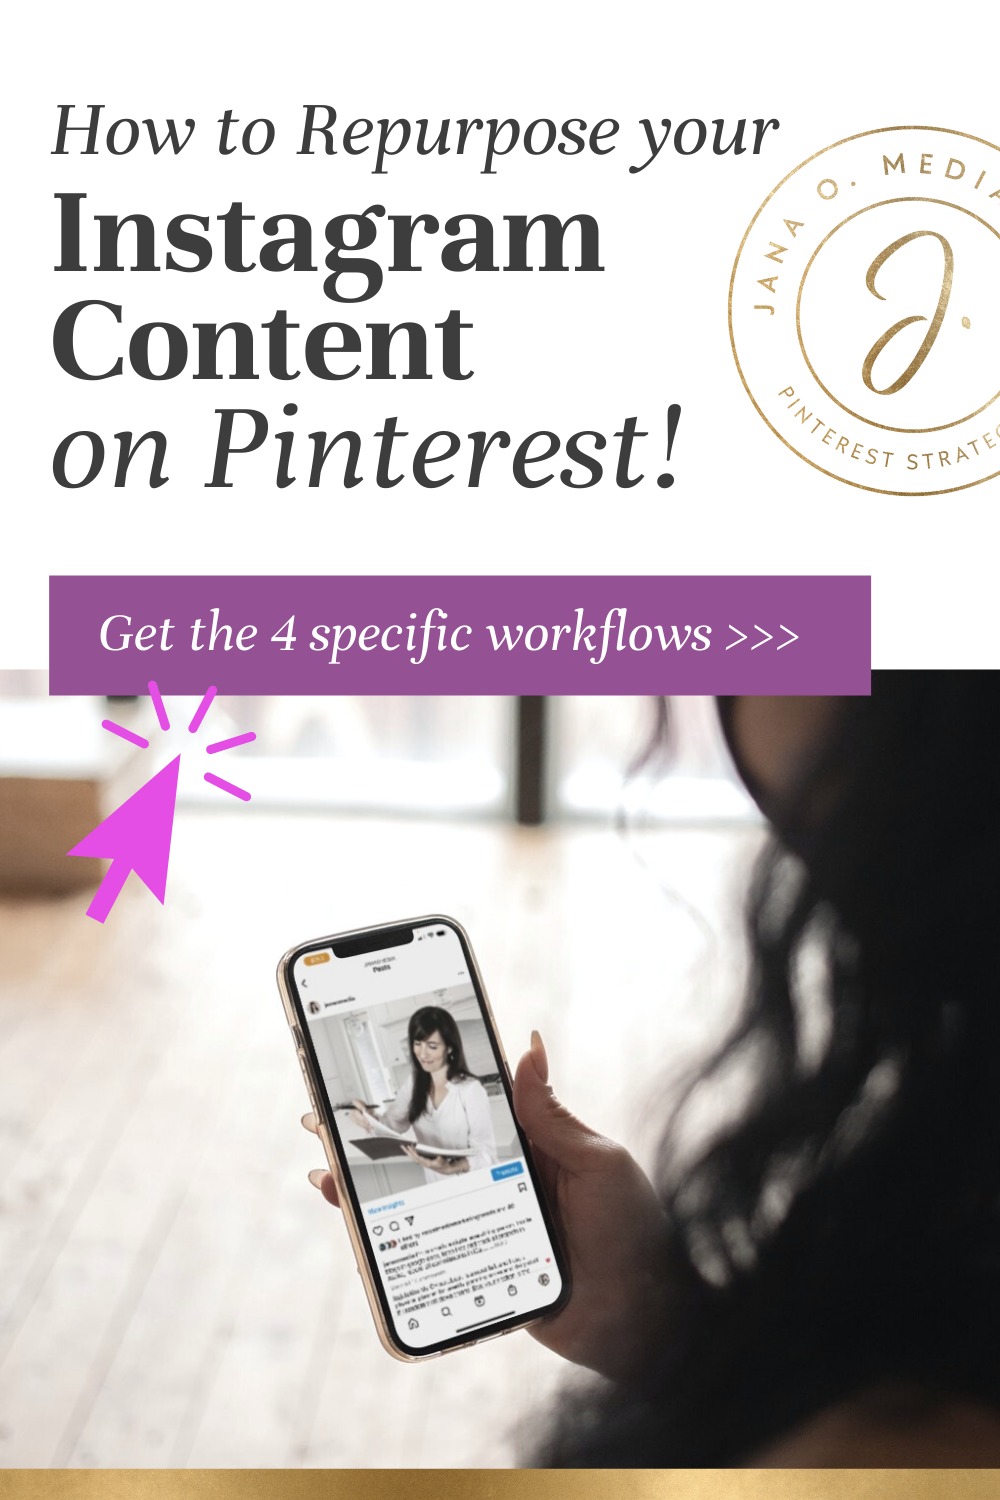 How To Repurpose Your Instagram Content on Pinterest - Jana O. Media